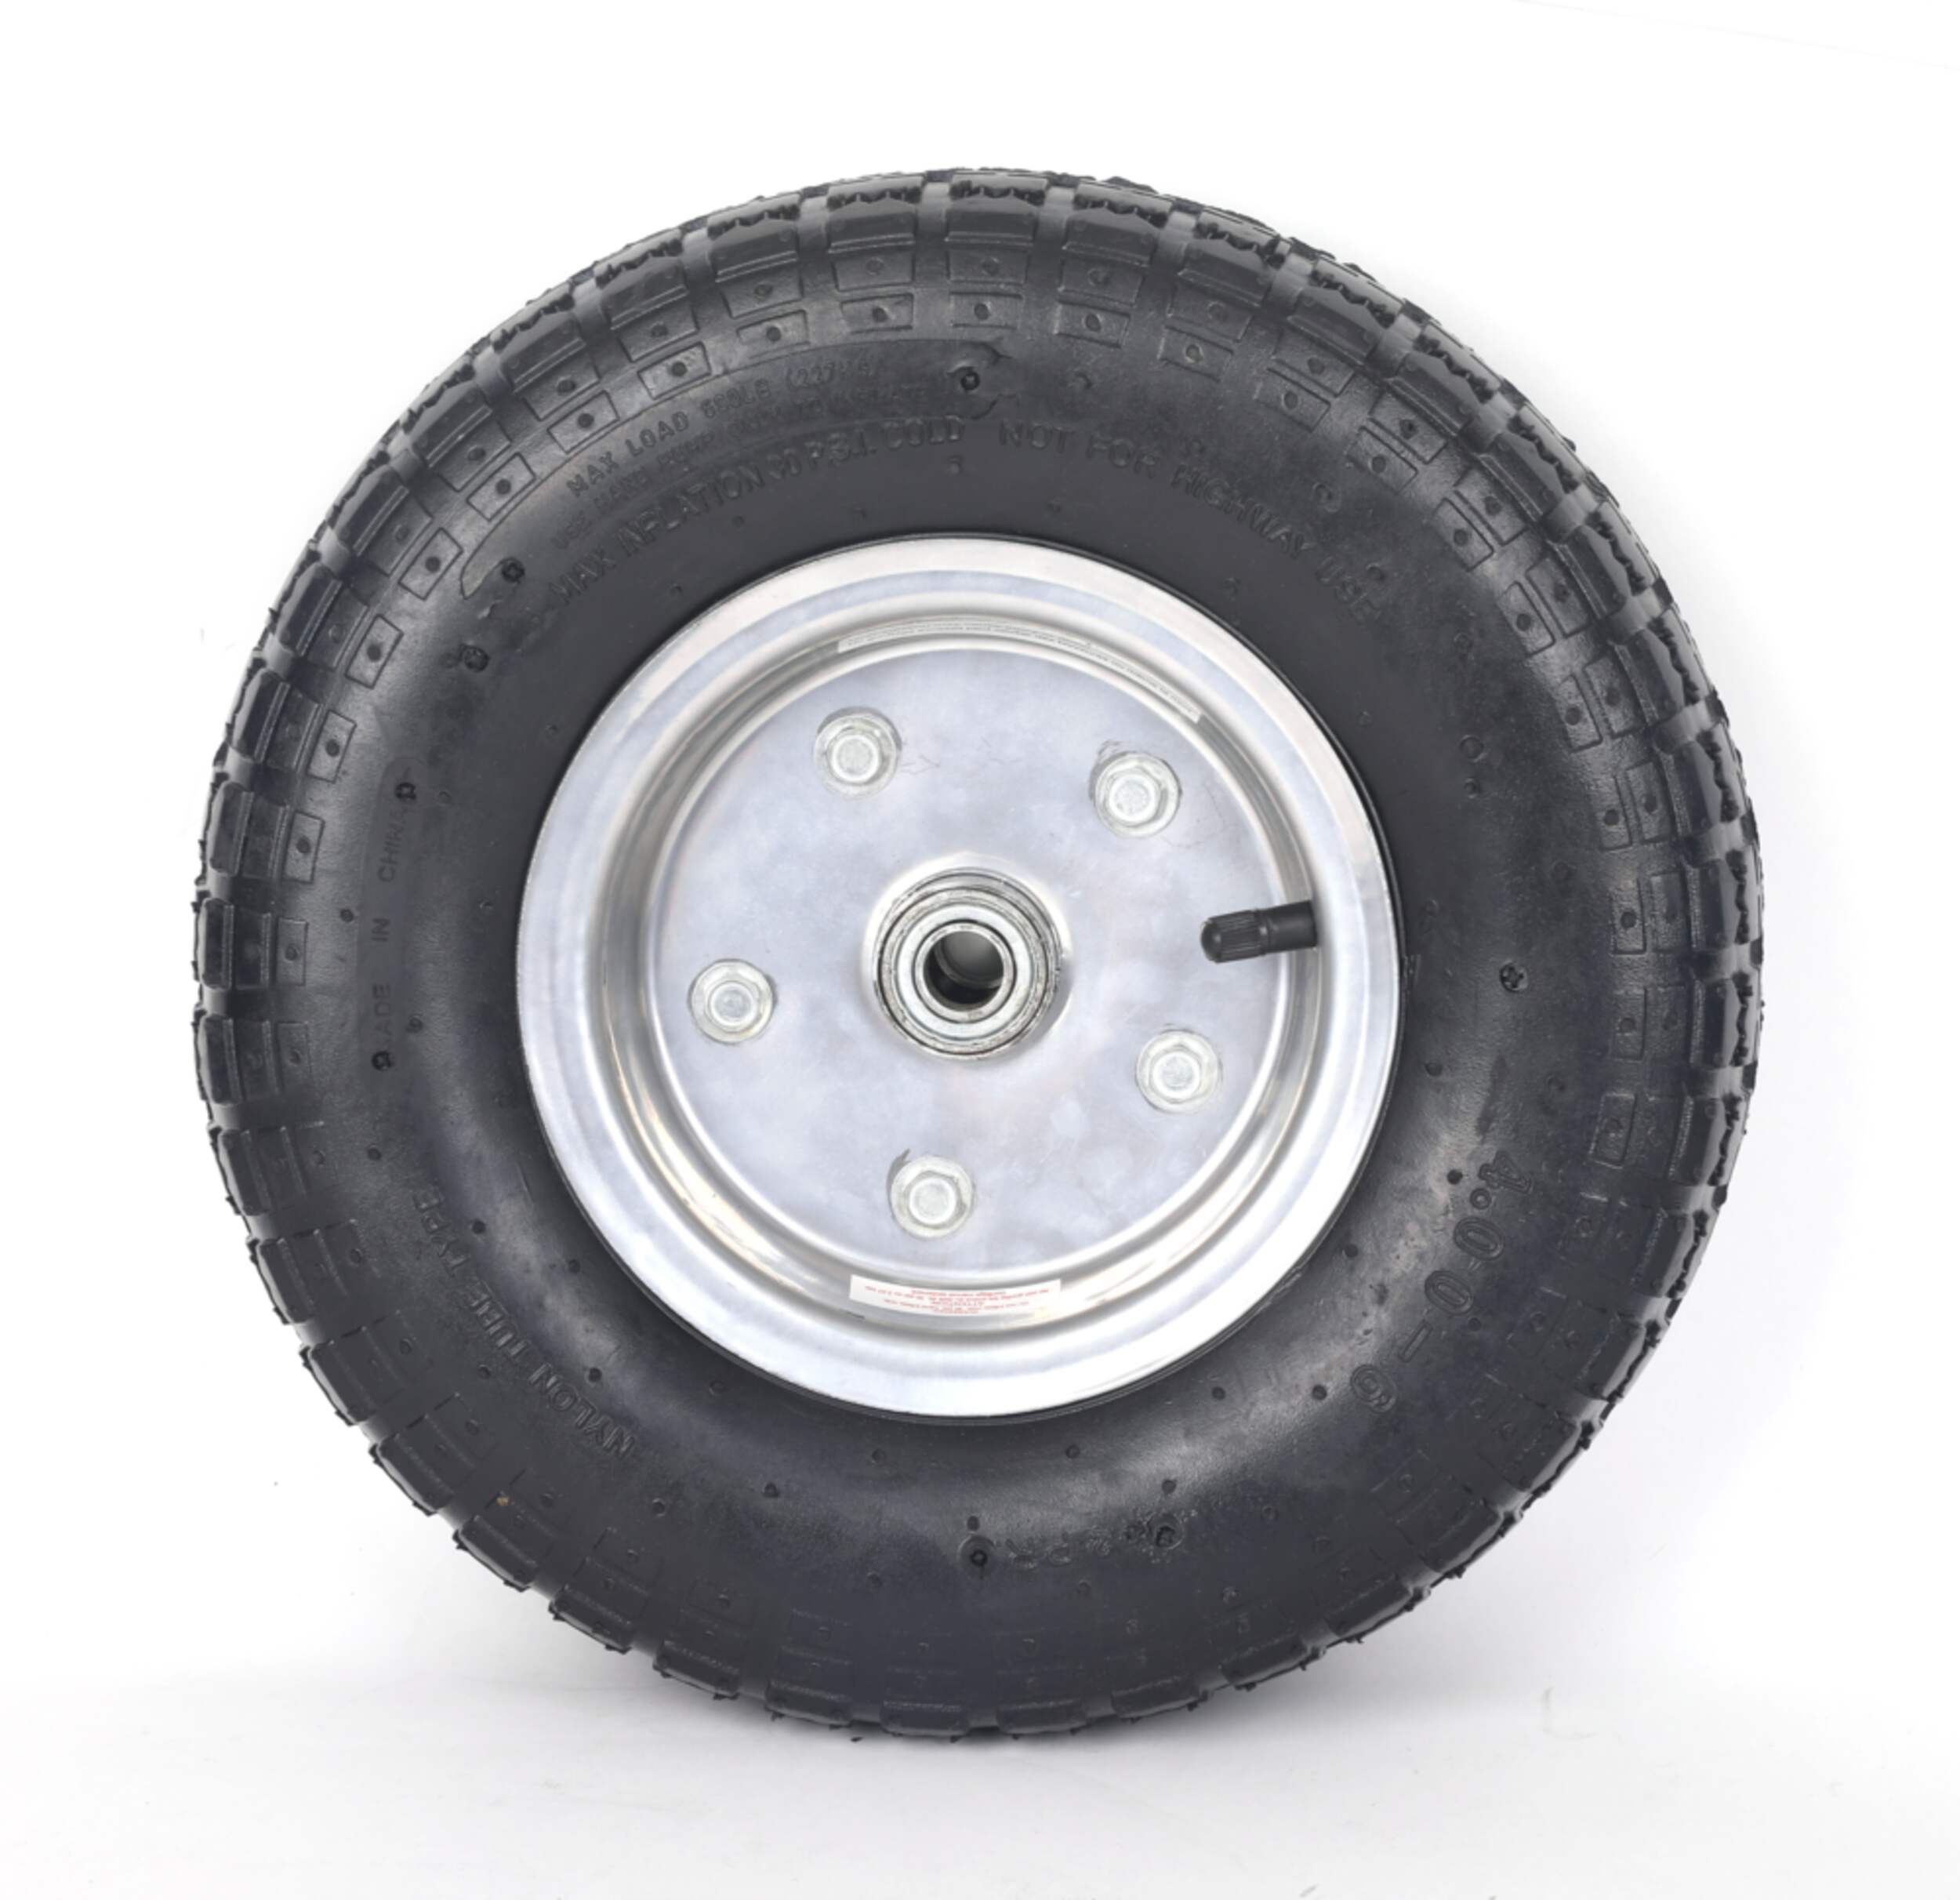 Mastercraft Replacement Pneumatic Wheel with Knobby Tread, 13-in ...